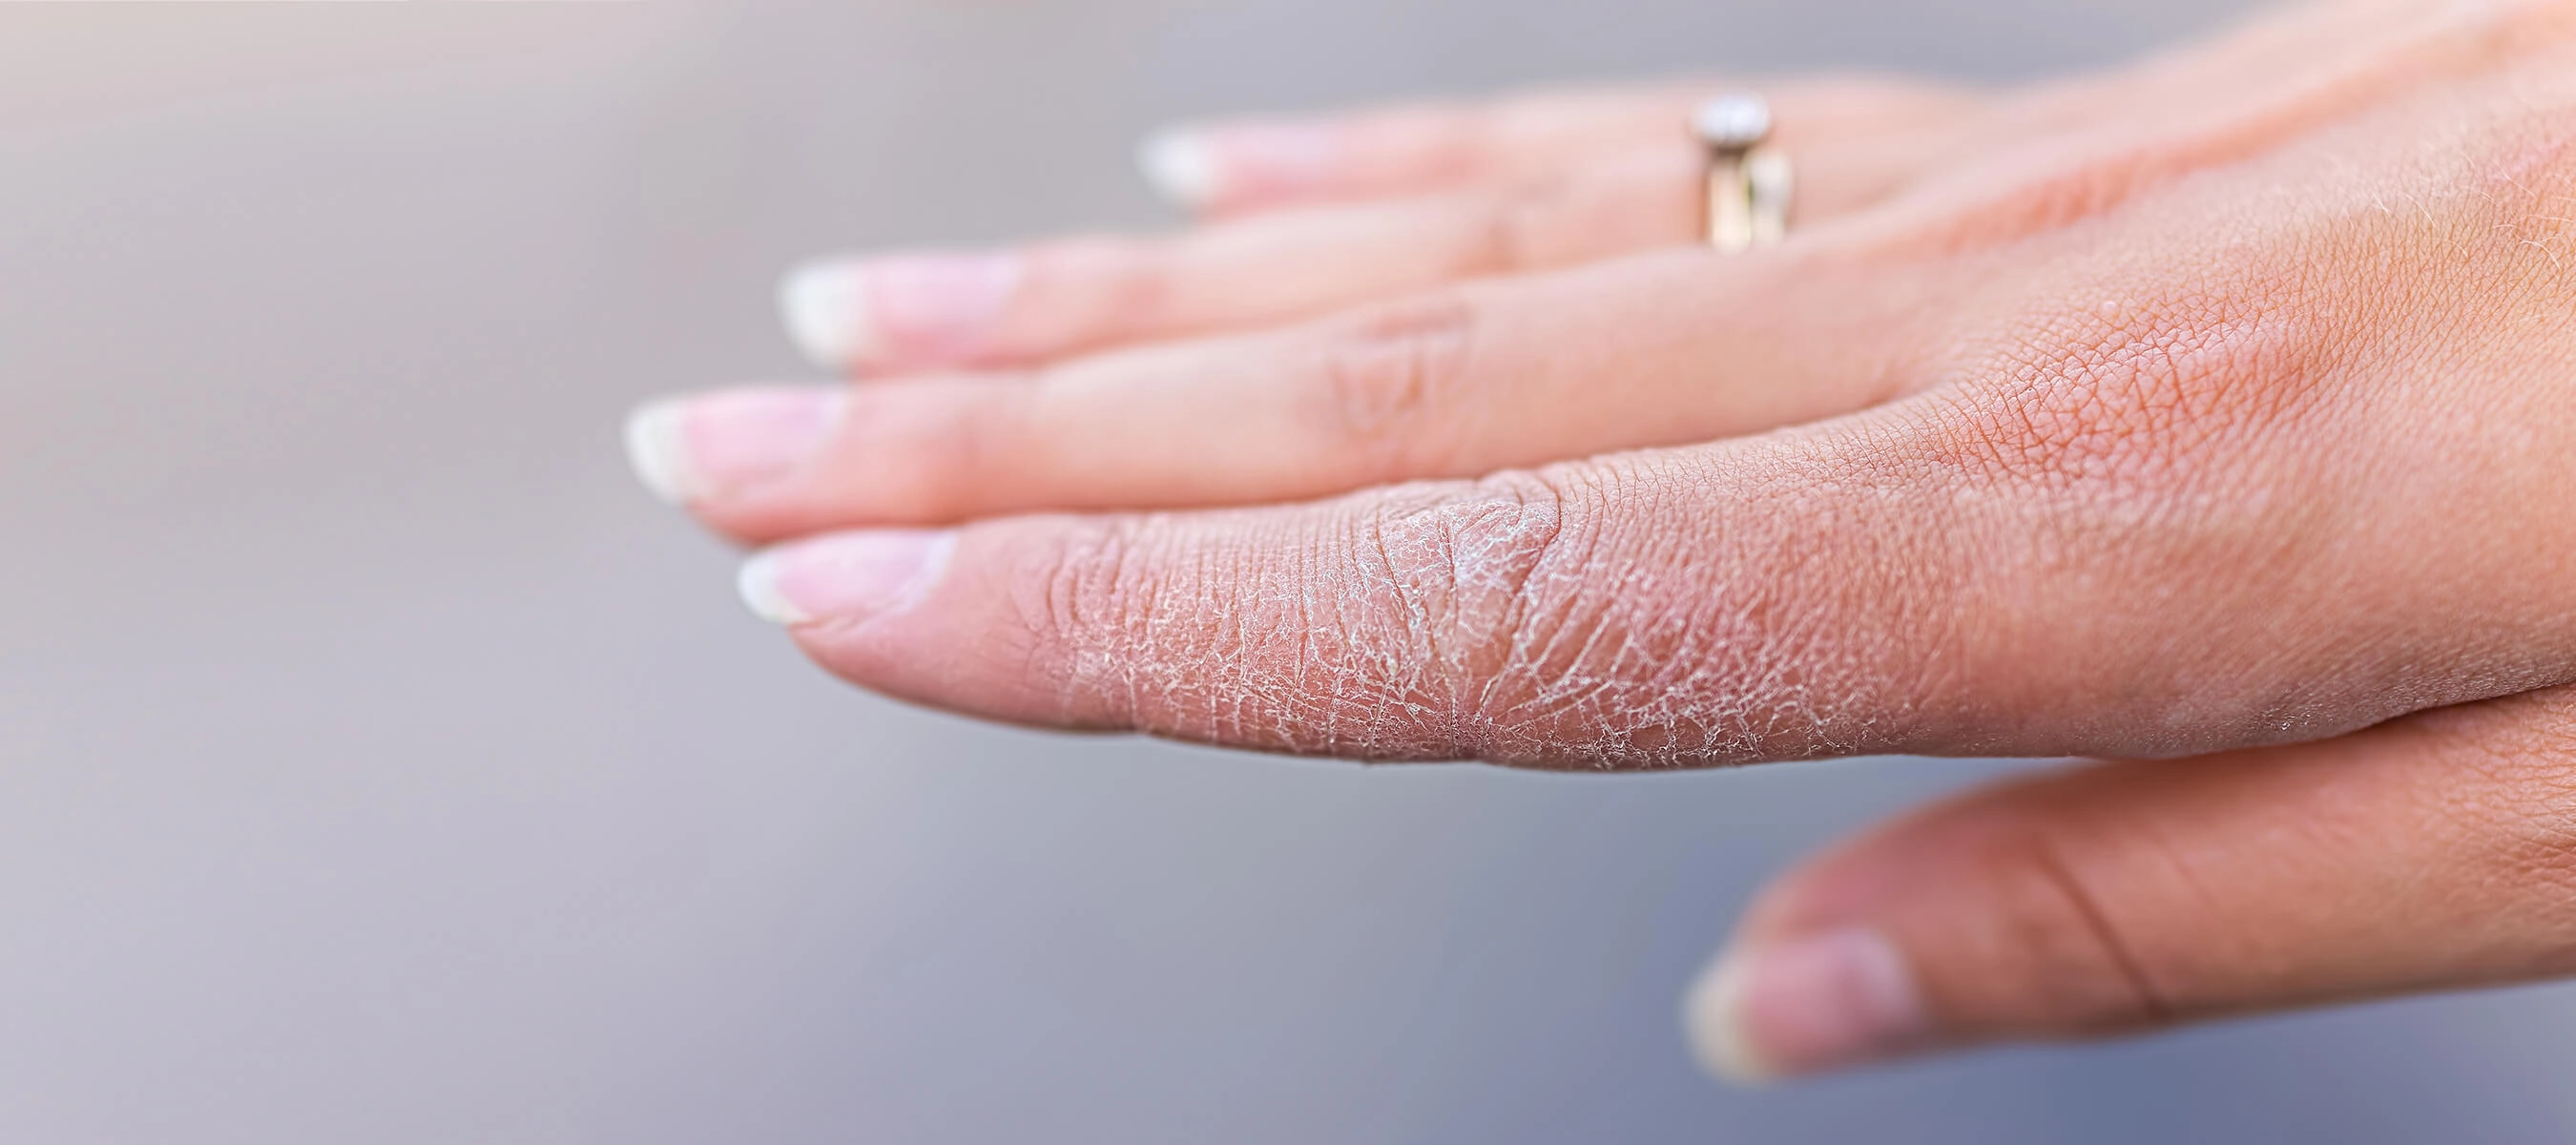 Treatment Options for Contact Dermatitis